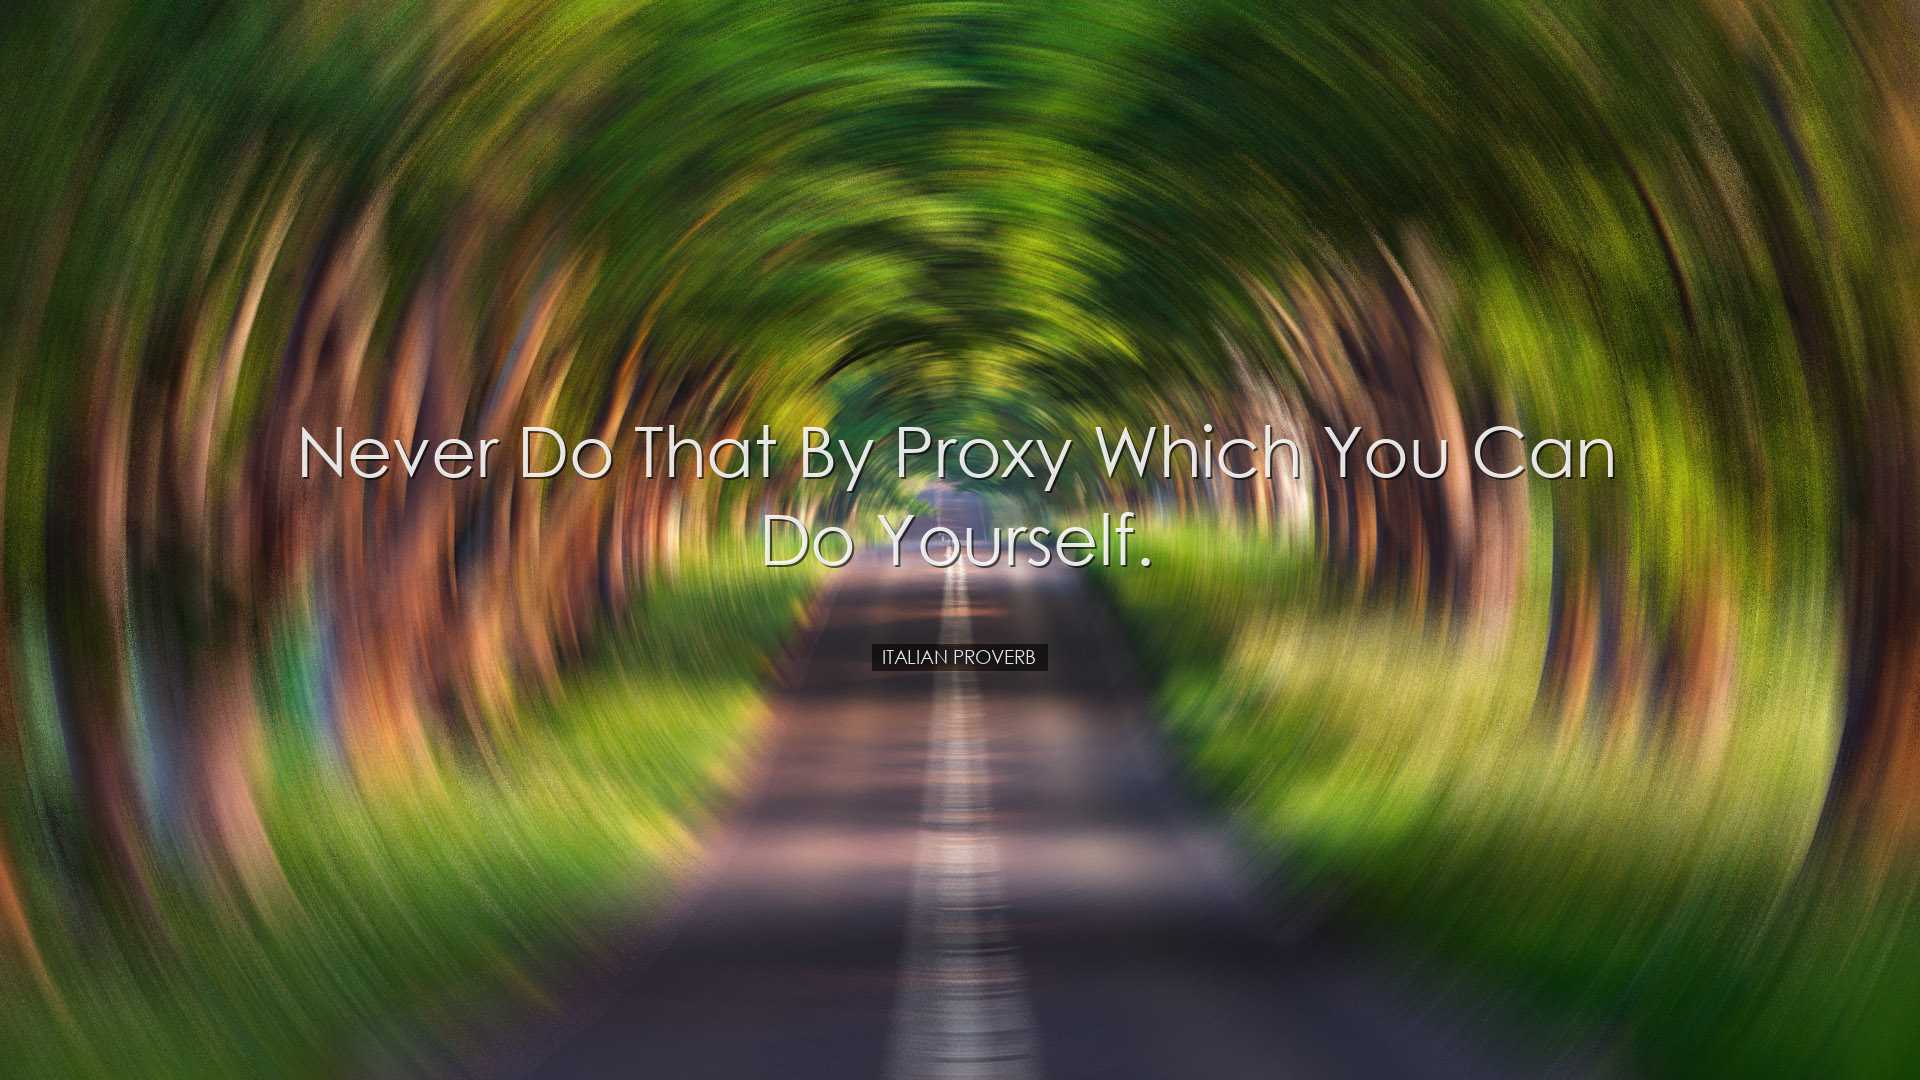 Never do that by proxy which you can do yourself. - Italian Prover